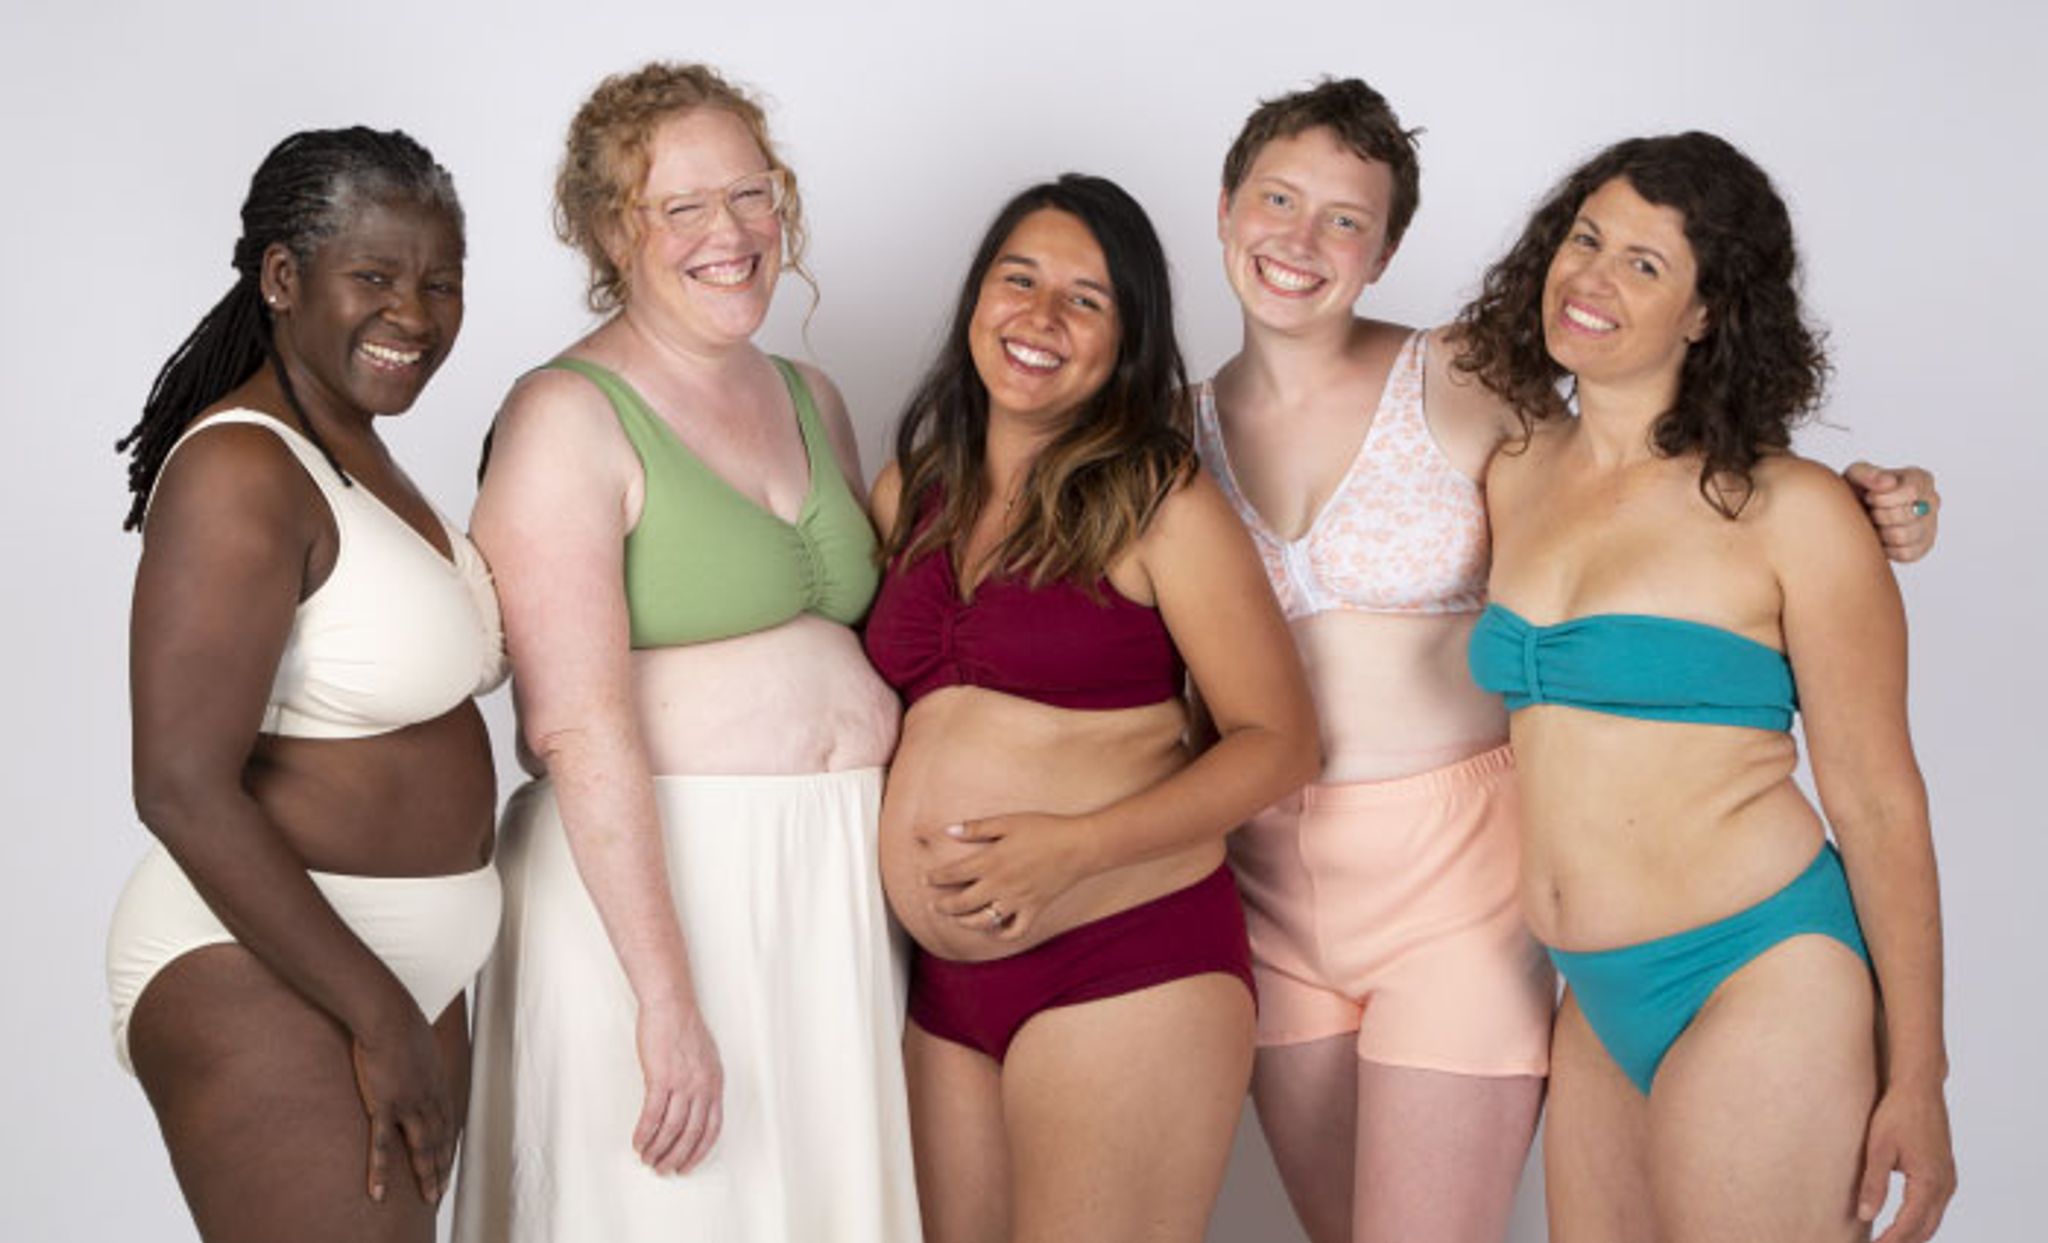 What Is a Plus-size Model? Everything You Need to Know About It in 2022